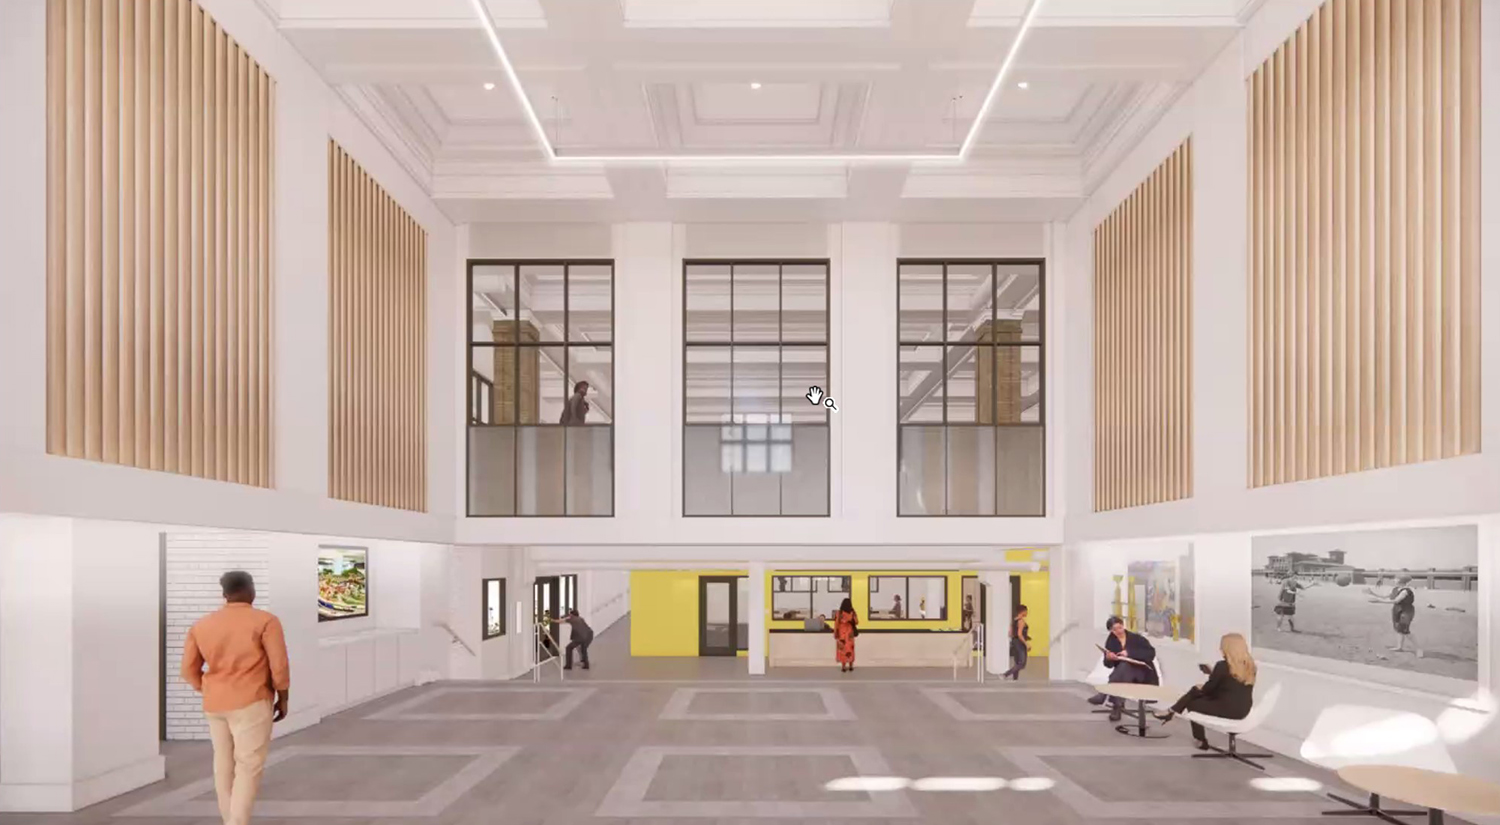 Lobby at Clarendon Community Center. Rendering by Booth Hansen